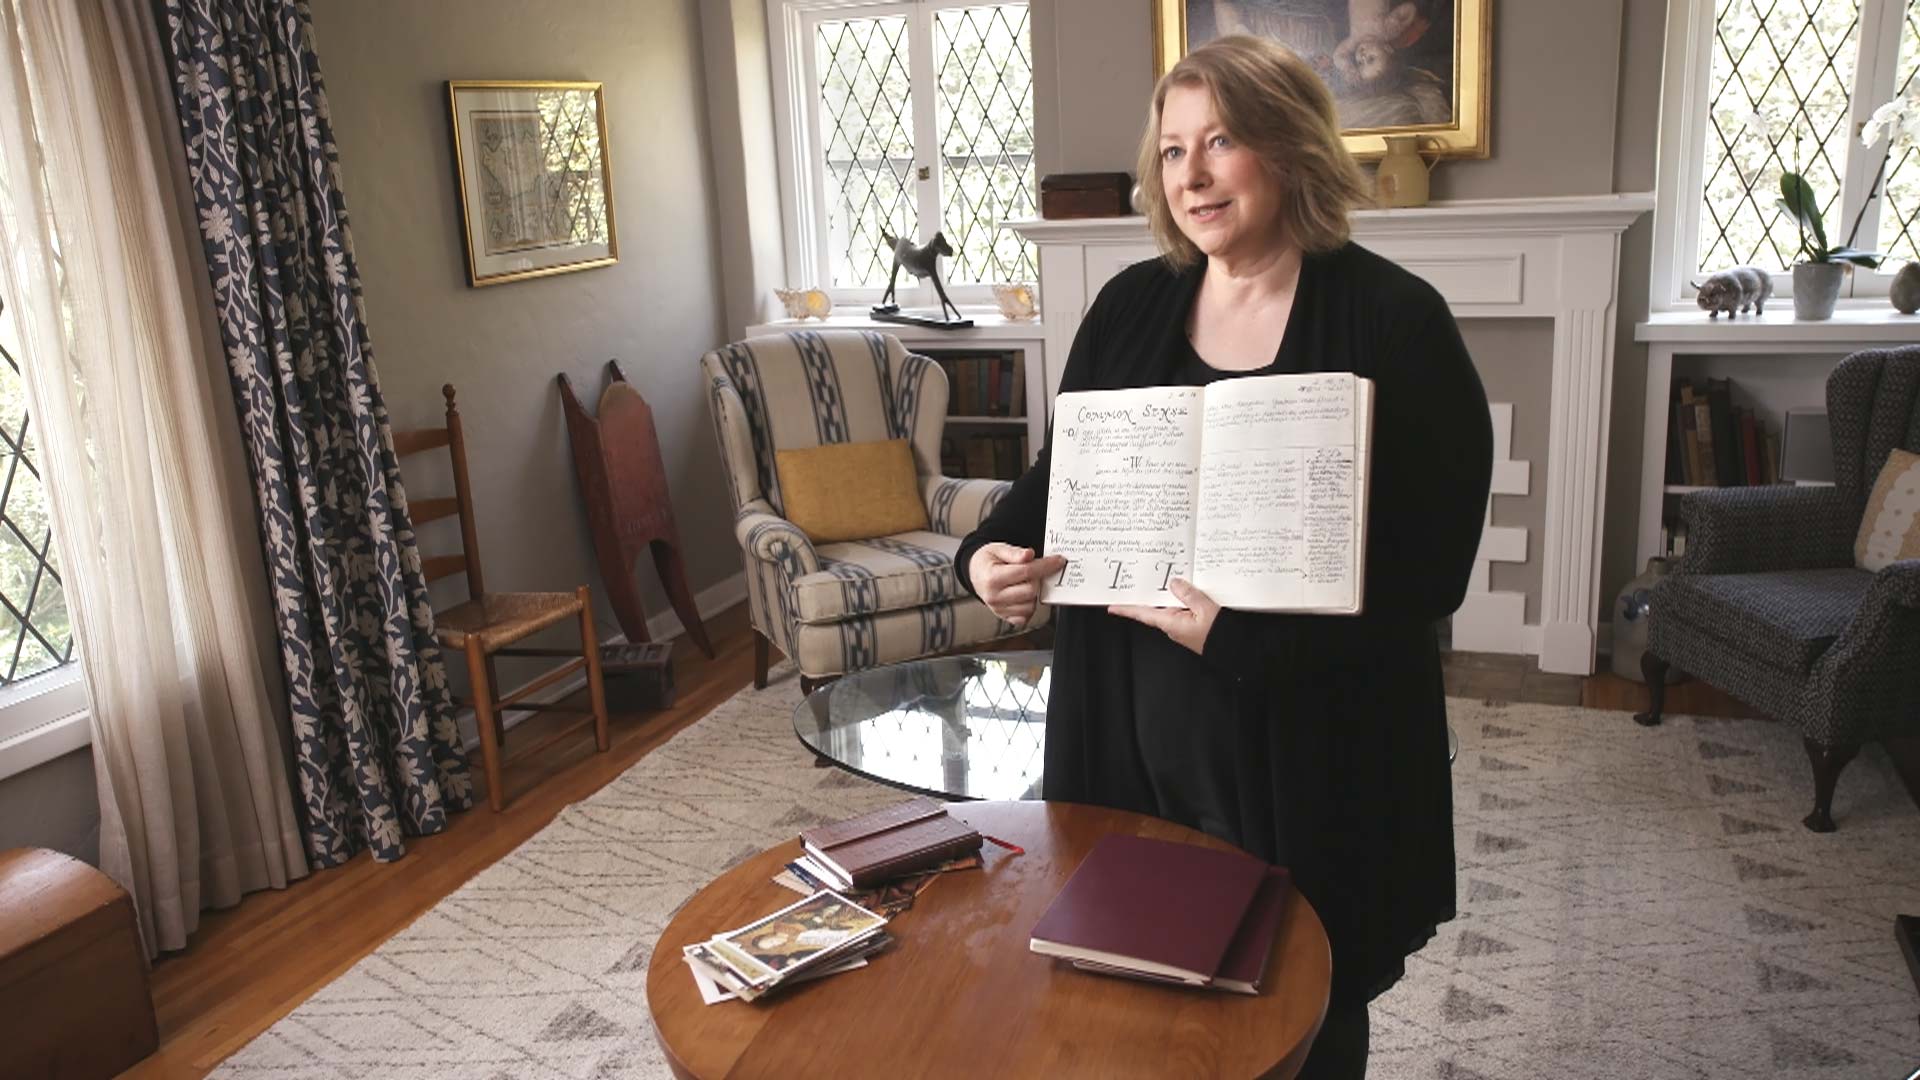 A Discovery of Witches: Author's Notes With Deborah Harkness Season 1 Episode 5 - Show and Tell